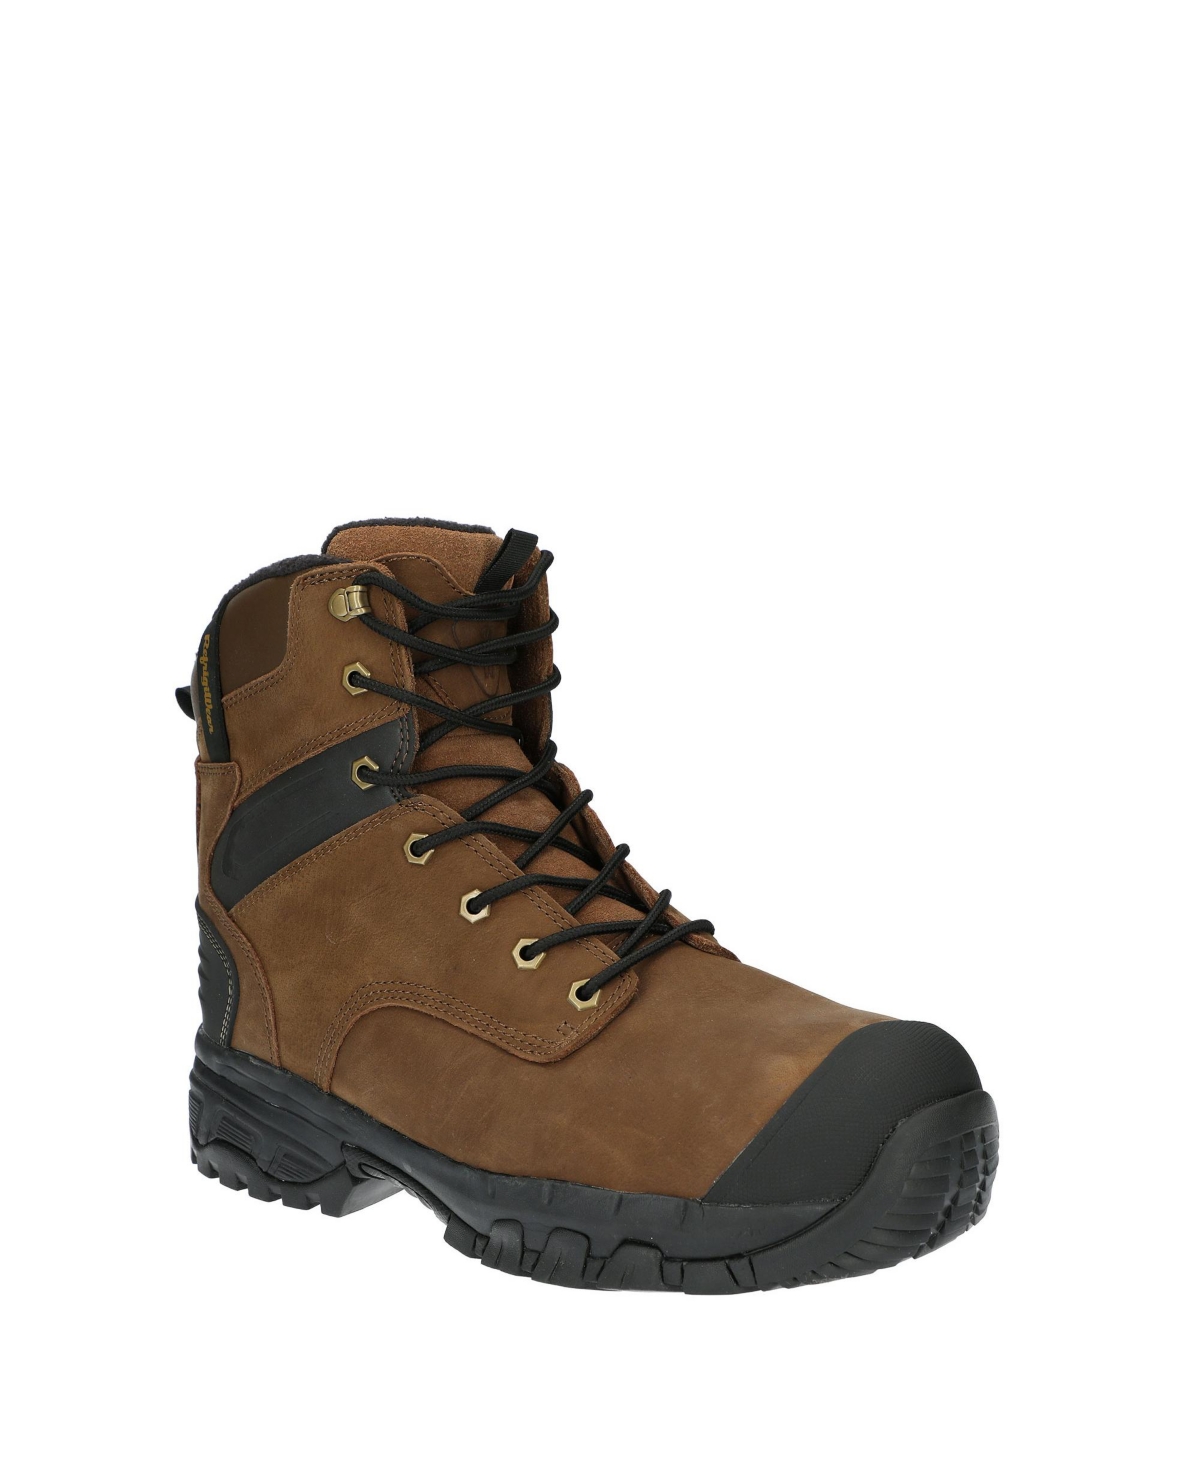 Men's Iron-Tuff Hiker Leather Waterproof Insulated Work Boots - Brown